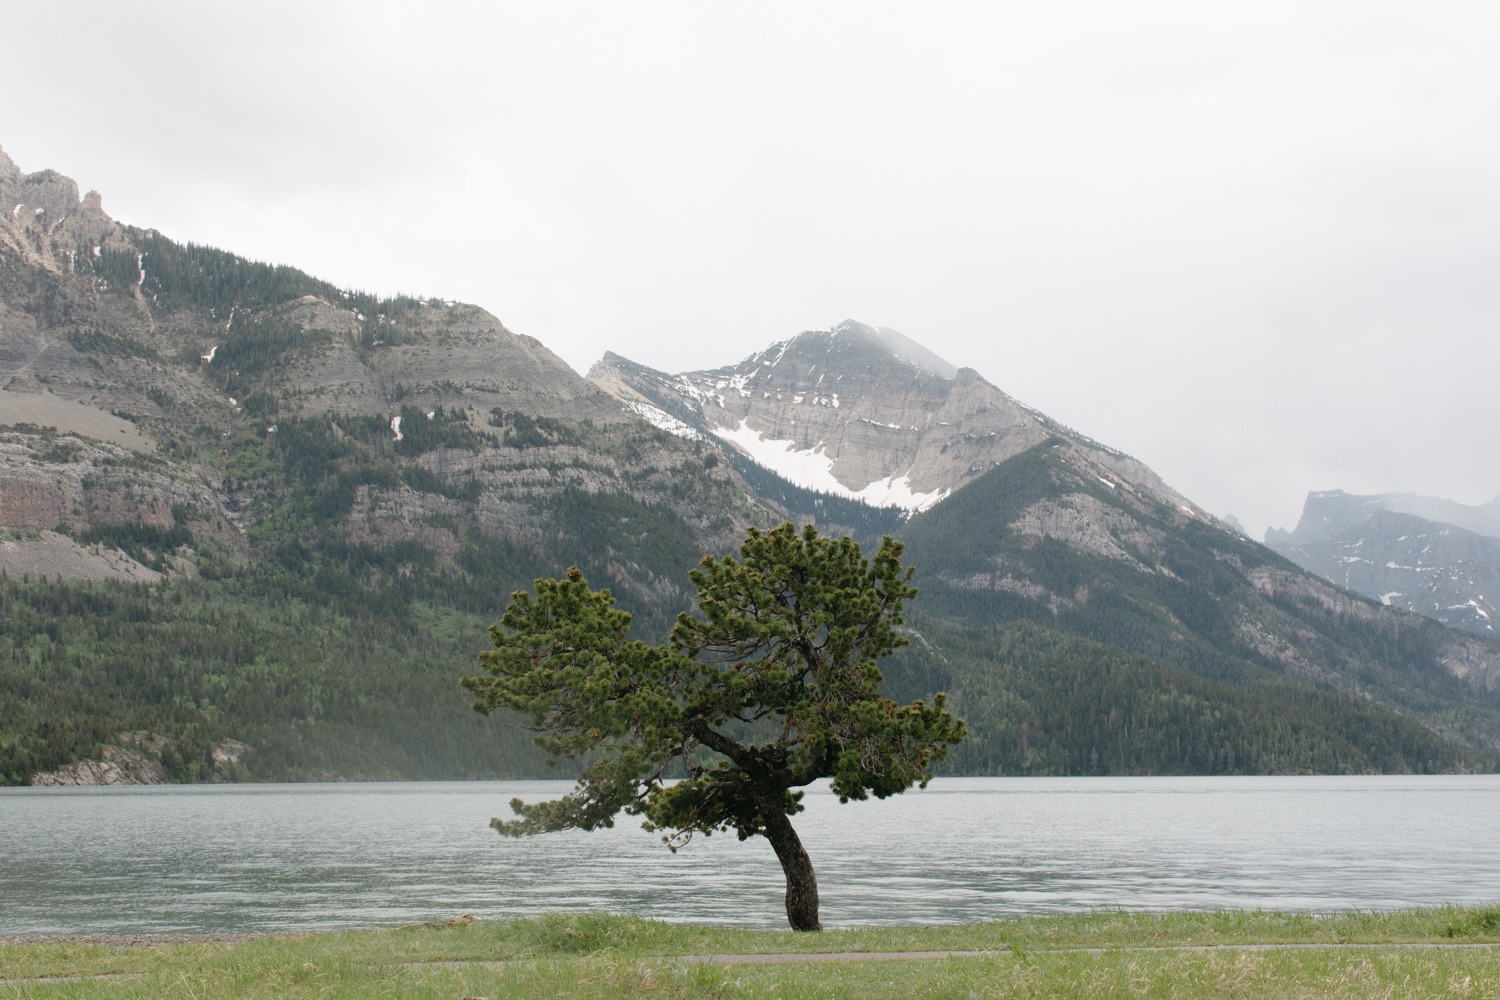 Tree along the lakeshore in Waterton Lakes National Park